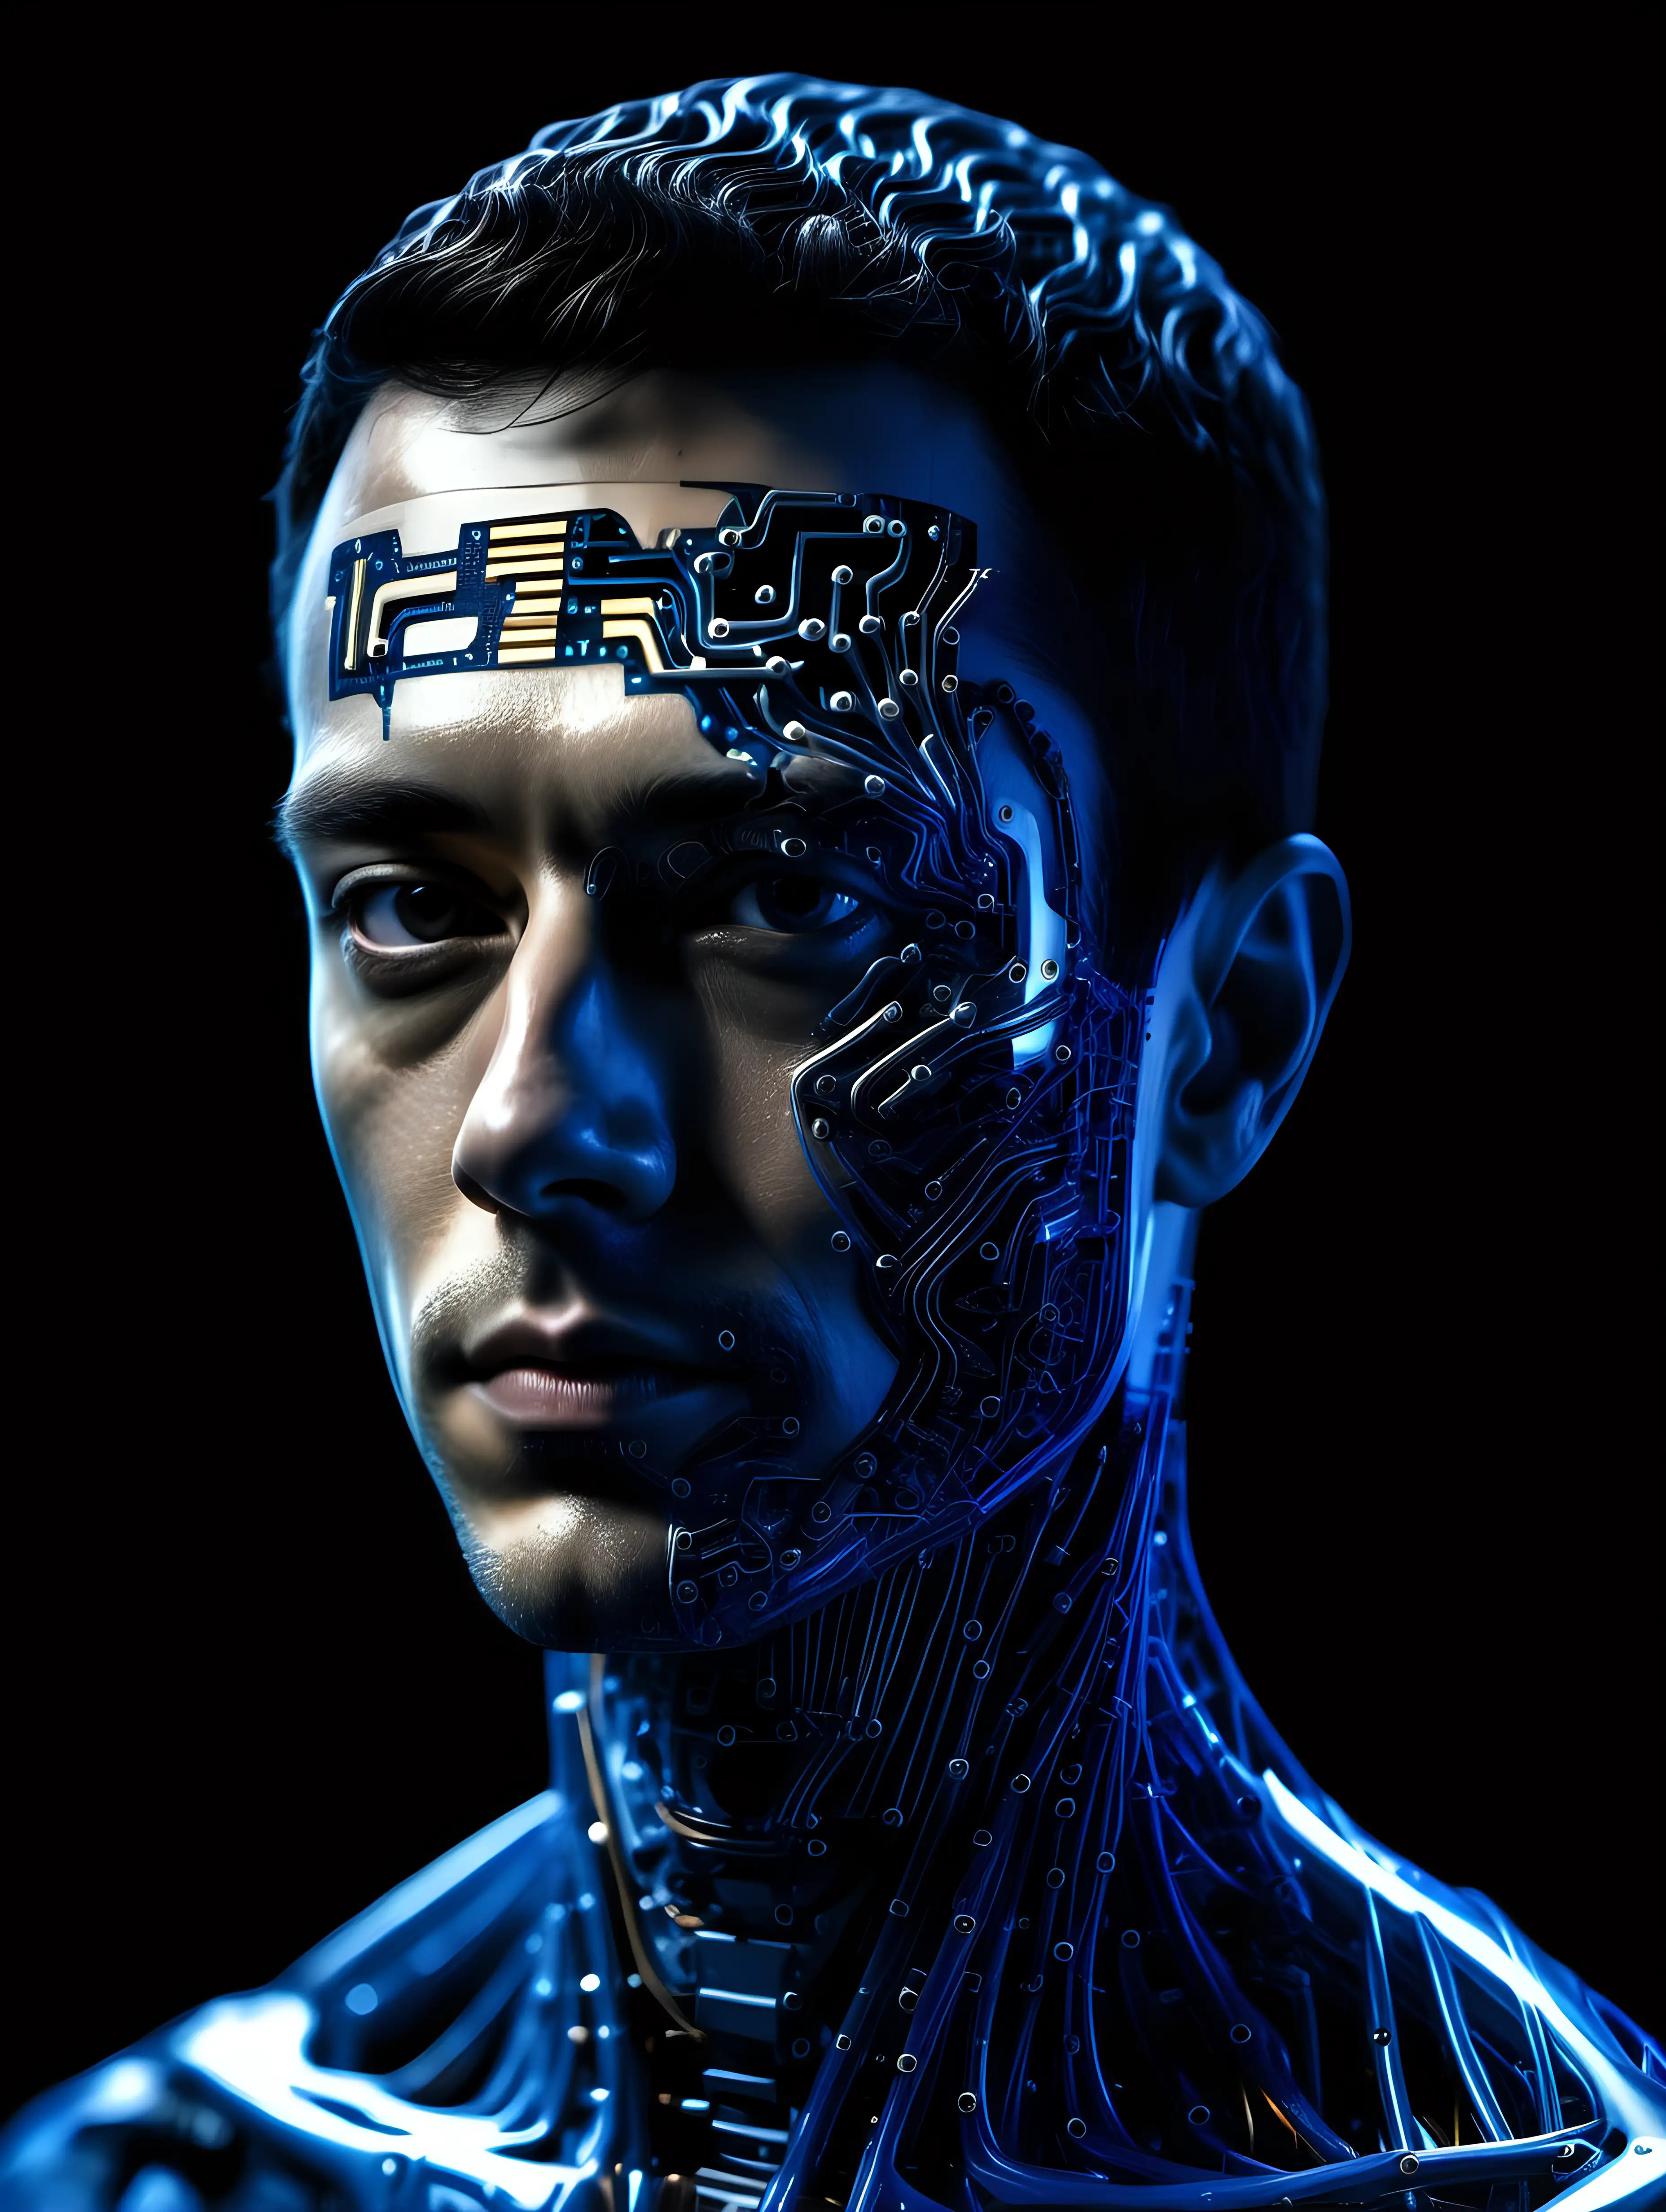 professional photo with slight reflection. dark background. dark blue high tech waves of neural network in bottom and double exposure nice man 23years old human head half robot half human westworld style uhd 8k realistic detailed bit of matrix style 